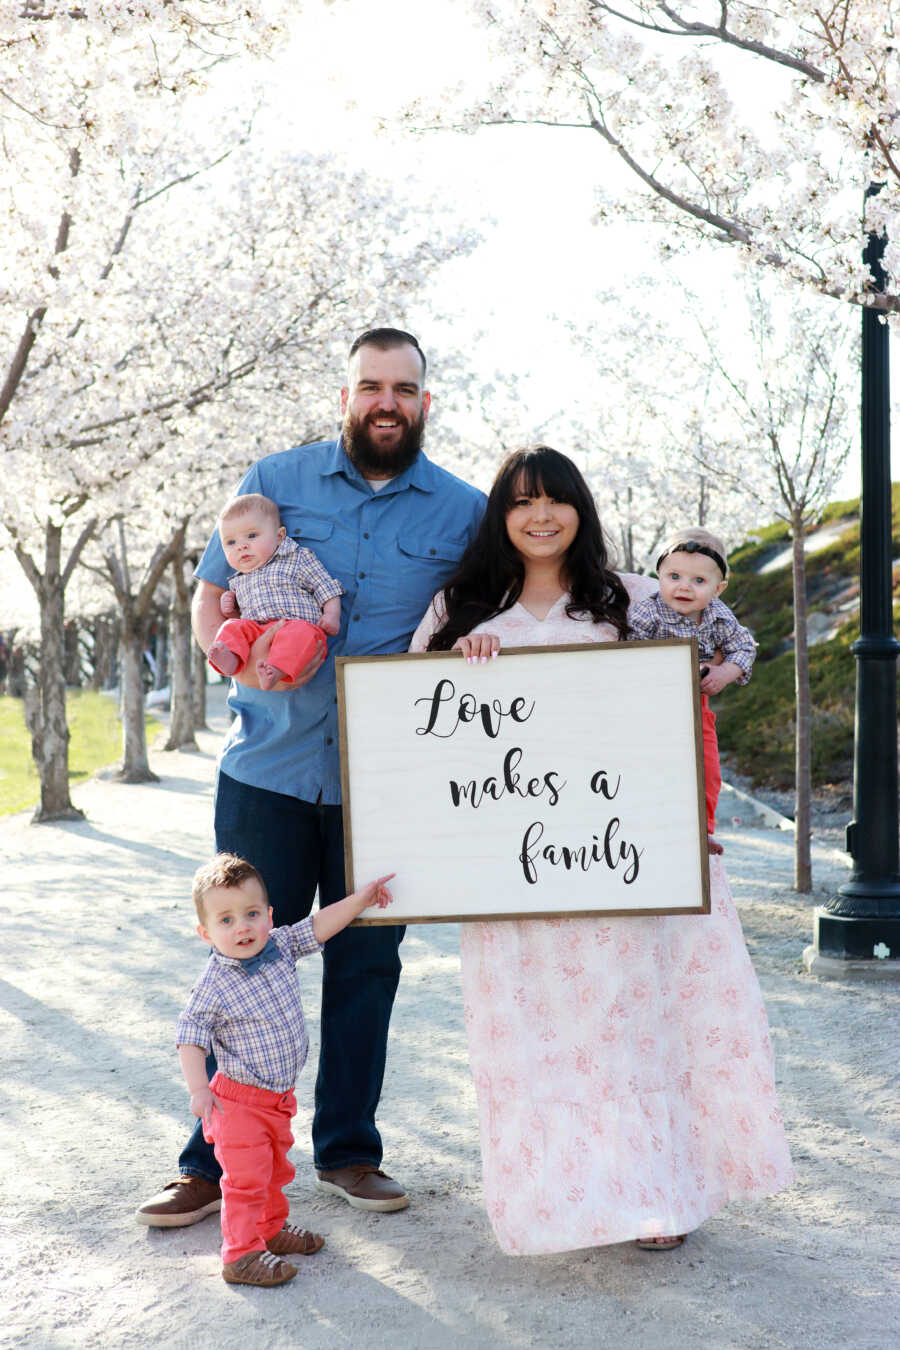 portrait of husband and wife holding their 3 adoptive sons while holding a sing that says "LOVE MAKES A FAMILY"